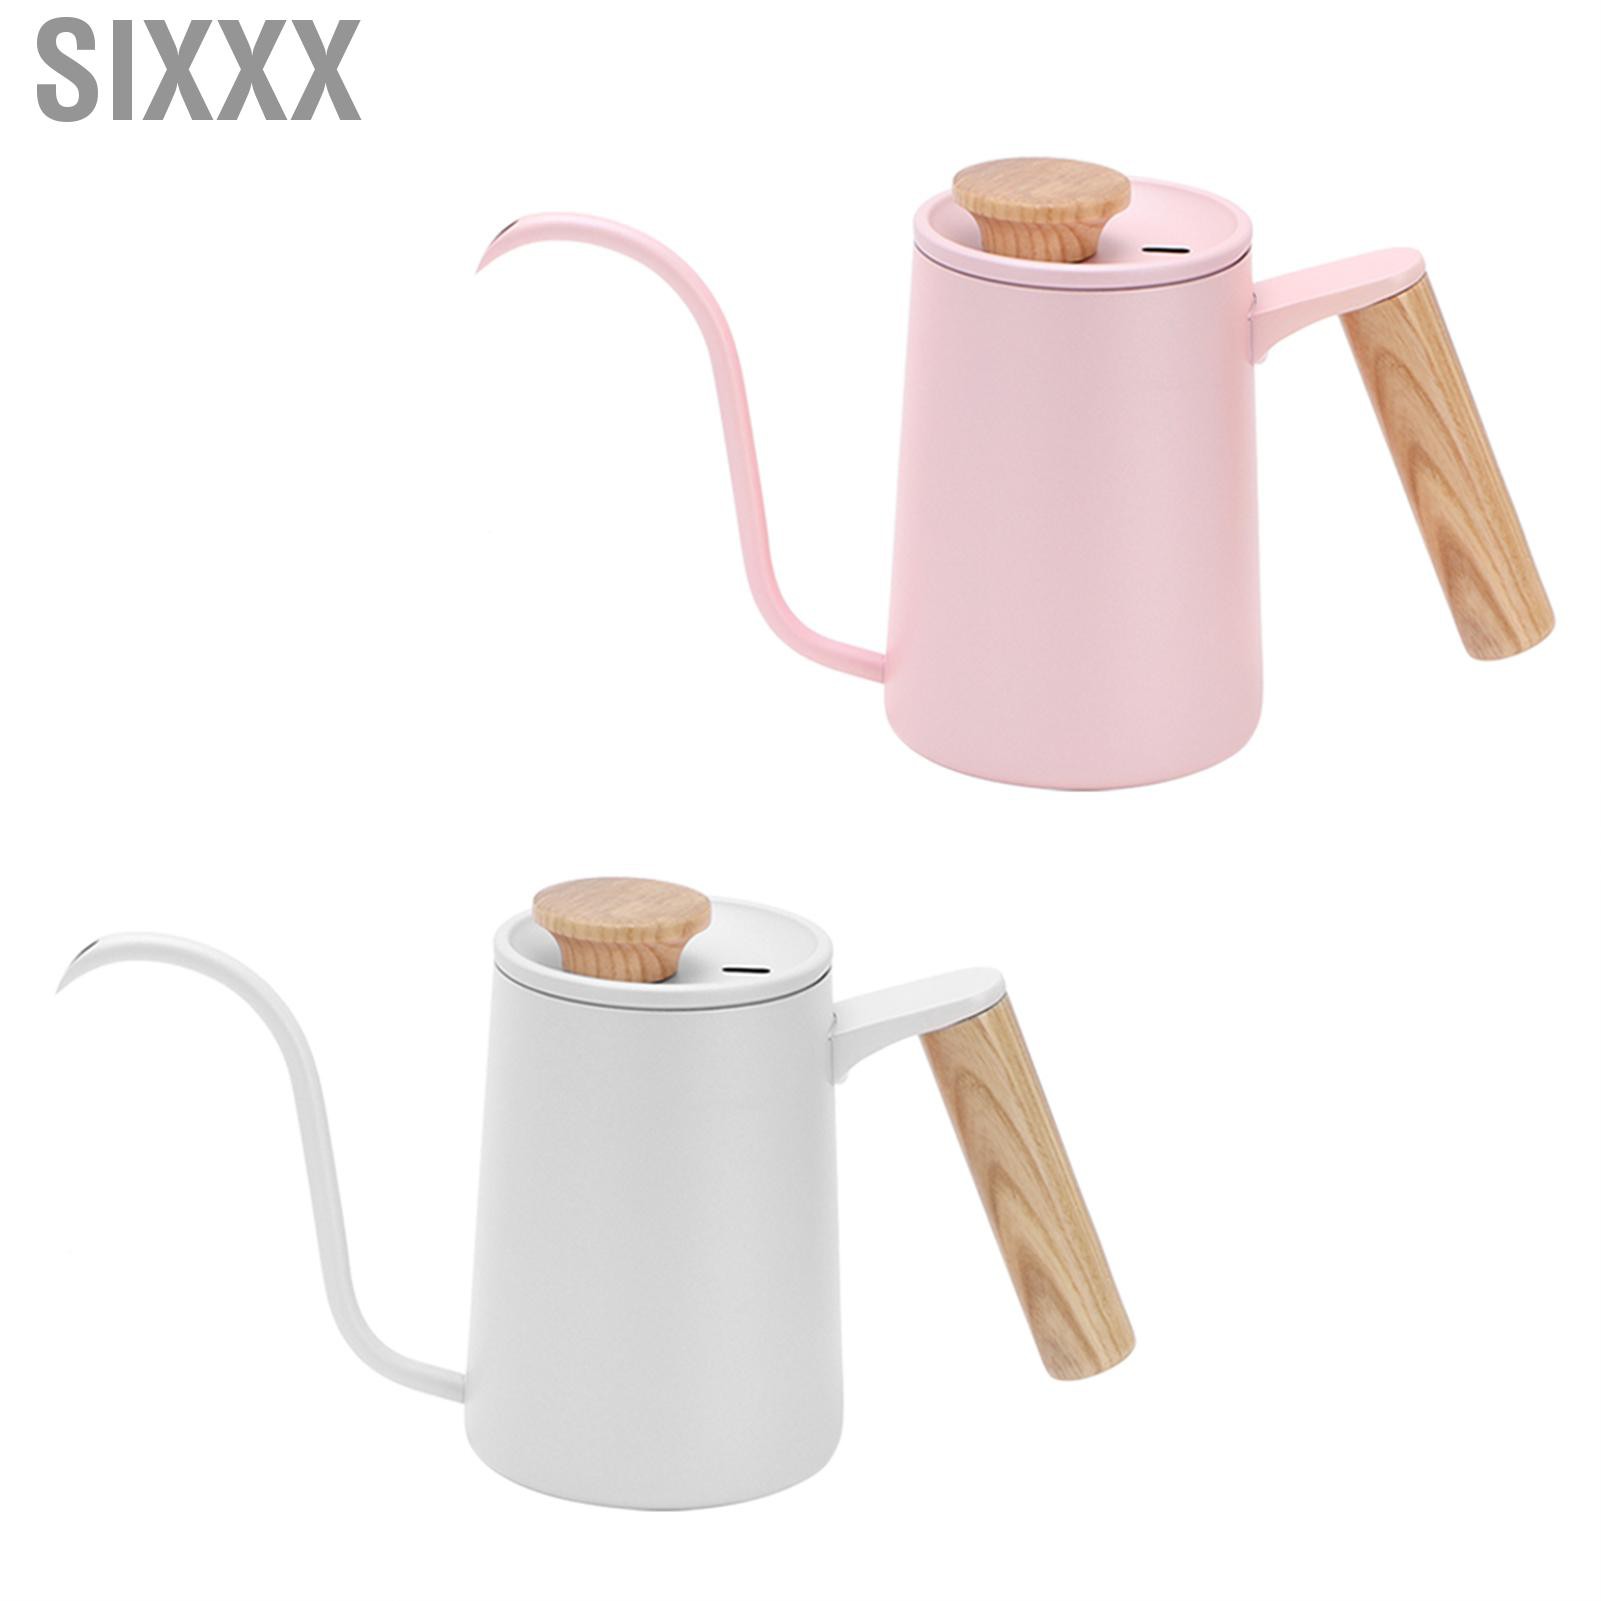 Sixxx 650ml Household 304 Stainless Steel Coffee Pot Hand Long Spout Kettle Tools